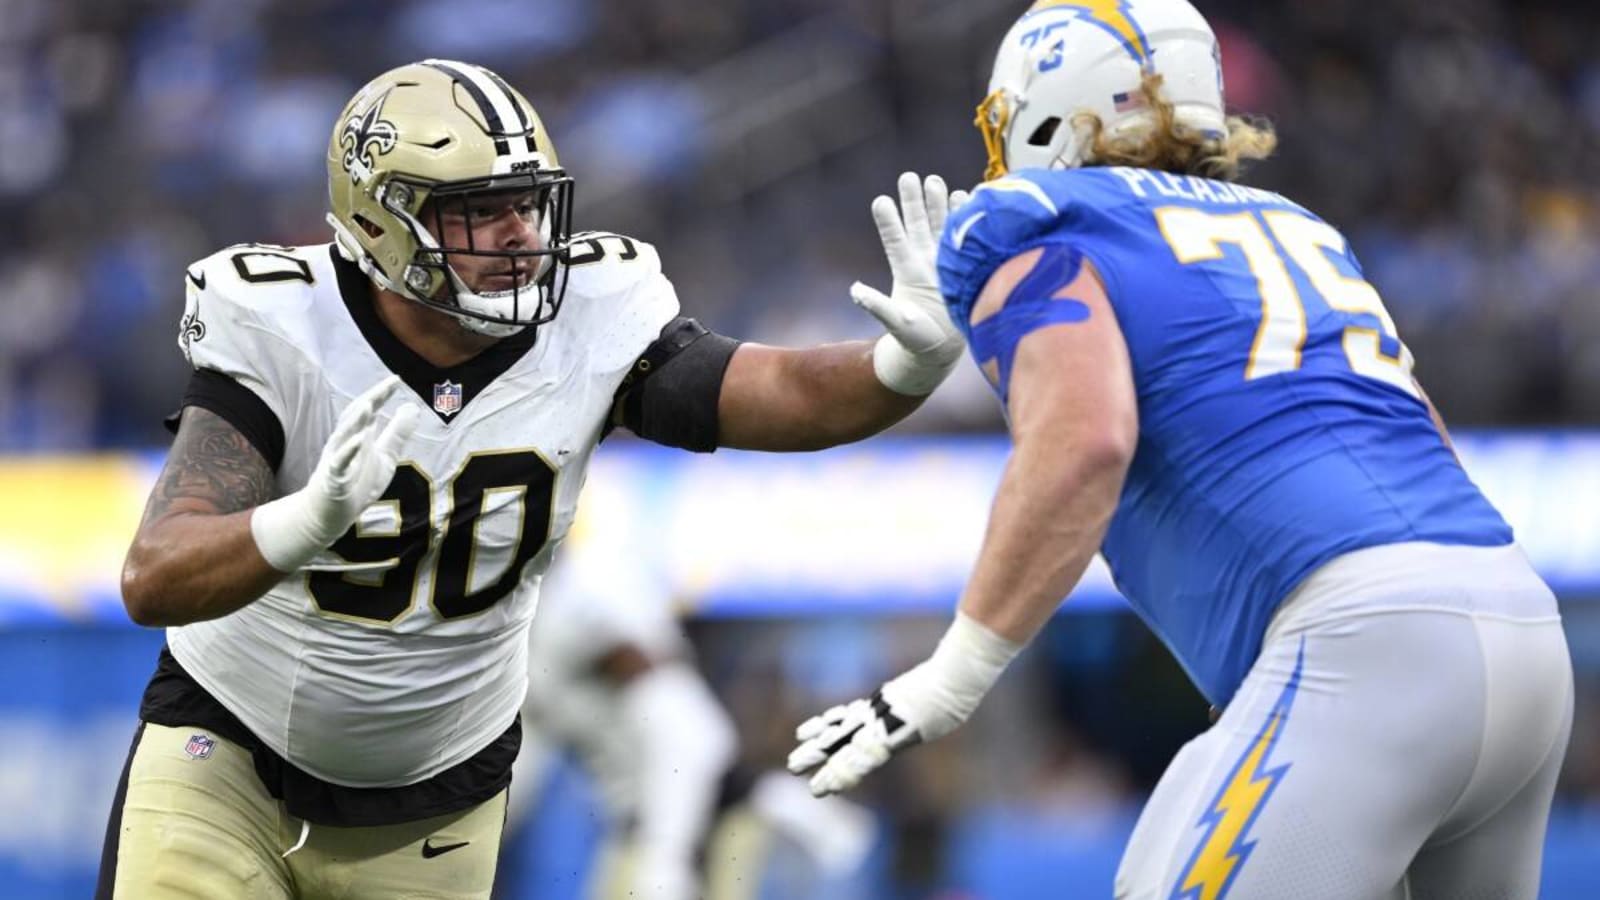 Saints Rookie Bryan Bresee Looks Like a Potential Star